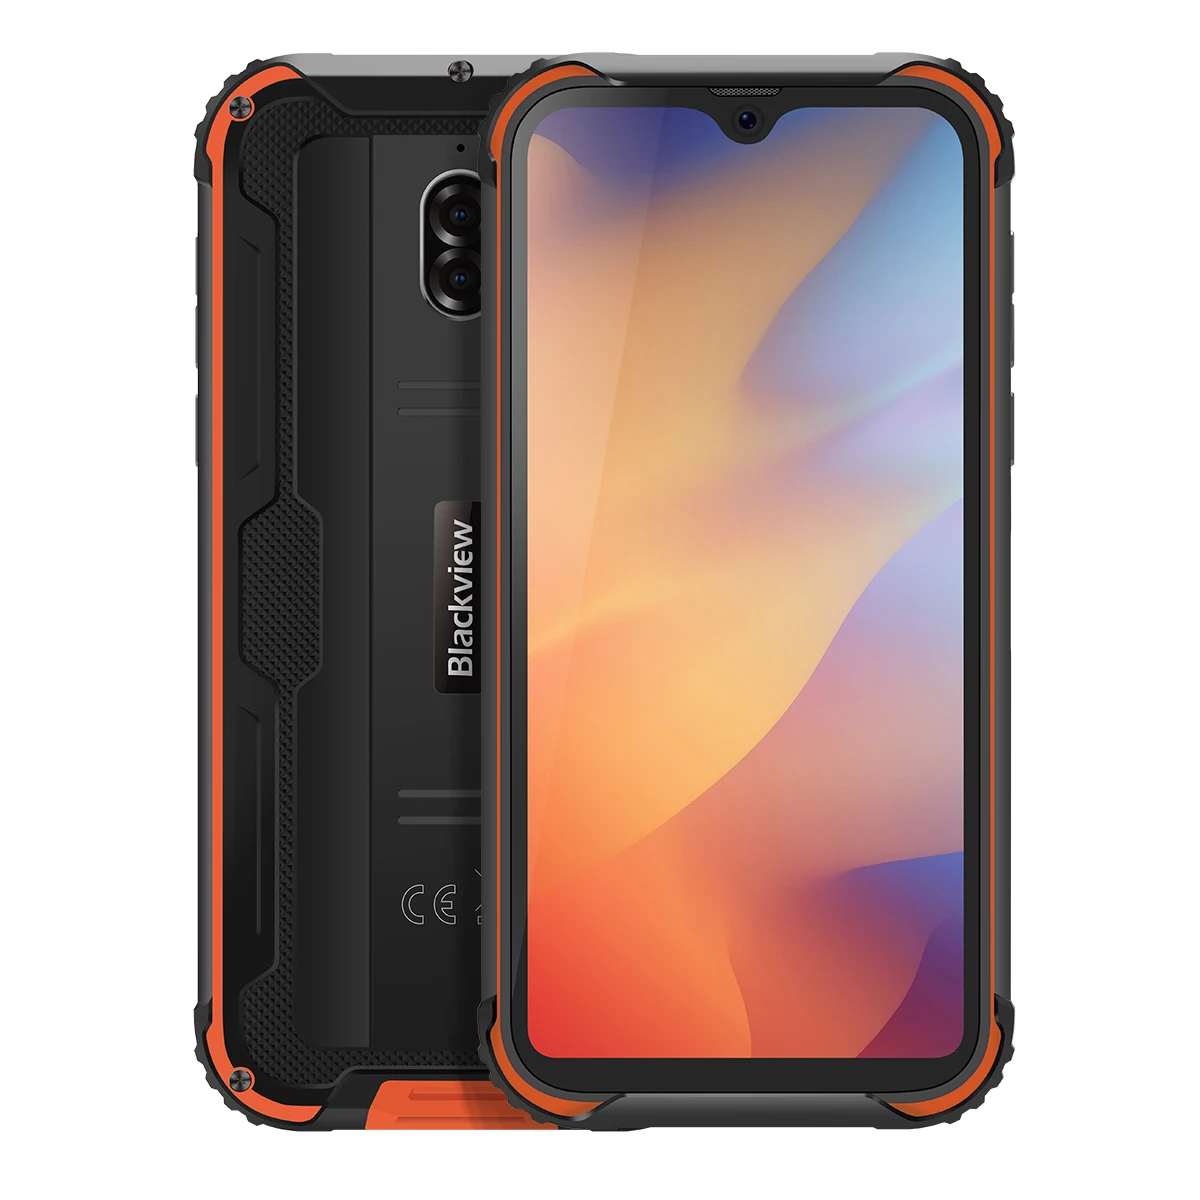 

Hot Sell Blackview BV5900 NFC IP68/IP69K Waterproof Shockproof Mobile Phones 5.7" Android 9.0 Quad core 4G Rugged Phone